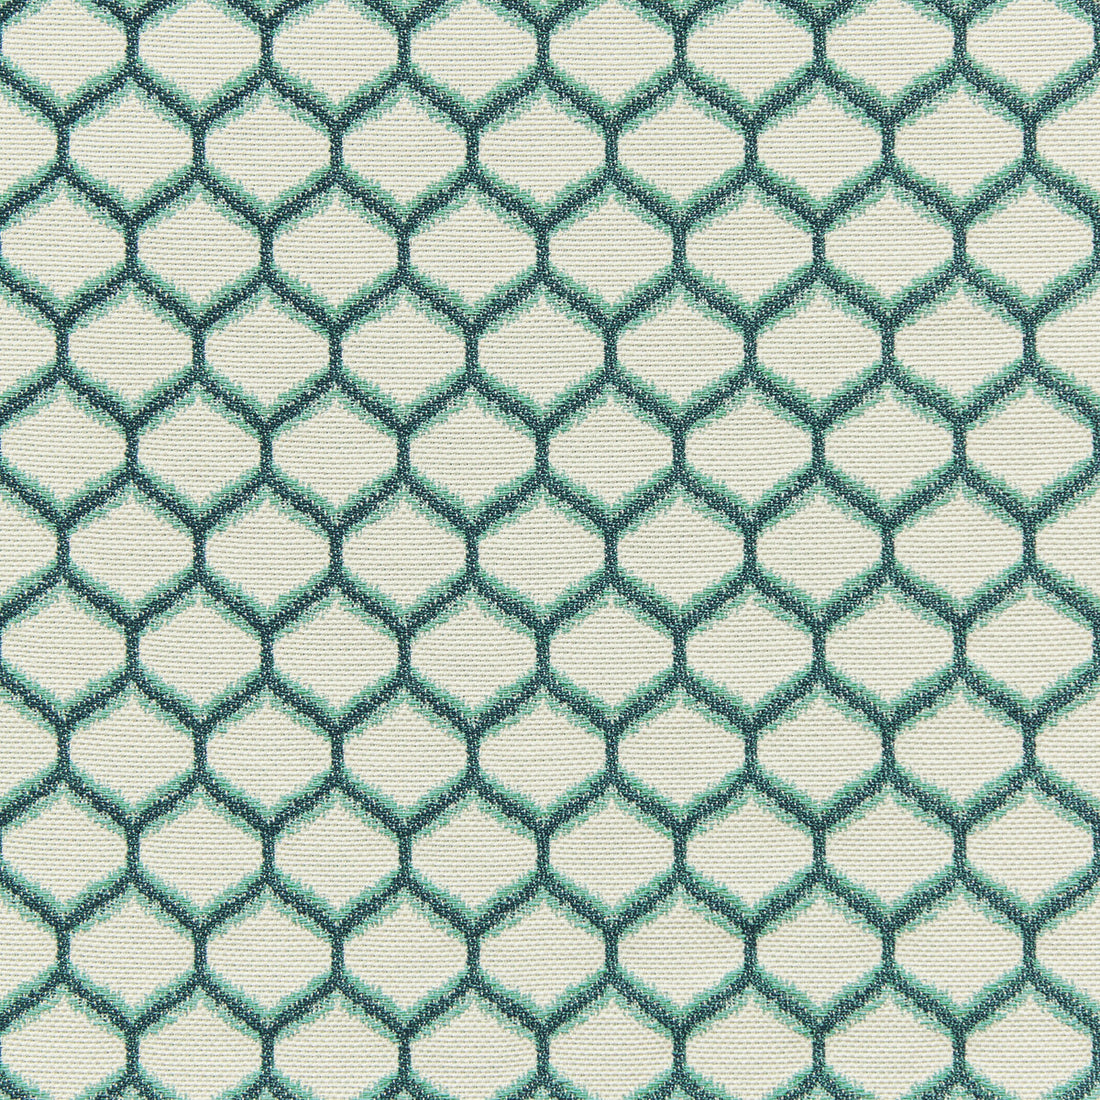 Elmley Weave fabric in aqua color - pattern 2020105.313.0 - by Lee Jofa in the Linford Weaves collection